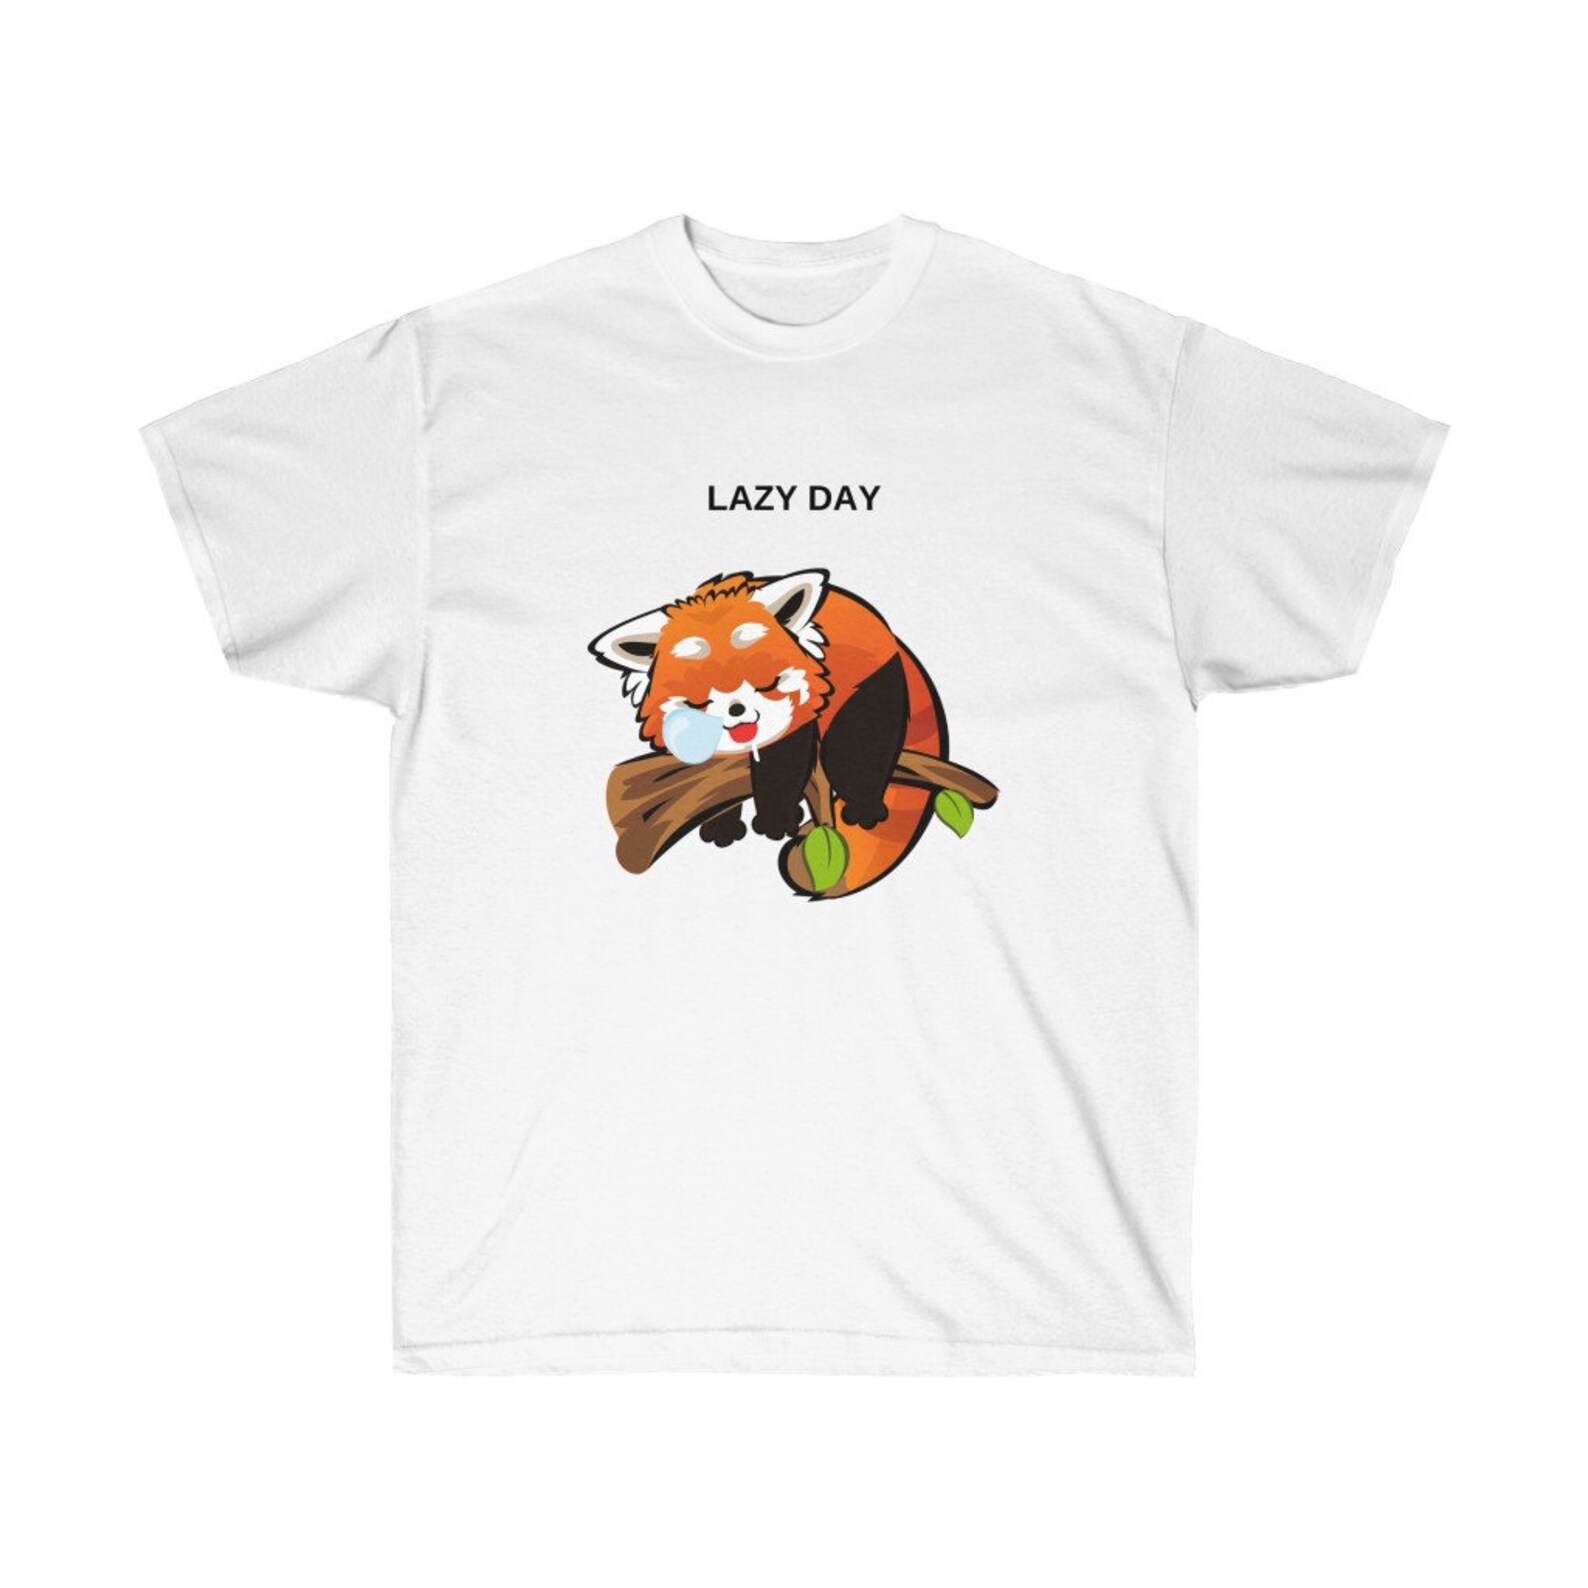 Red Panda Lazy Day T-shirt Unisex Printed Cotton Art Graphic - Etsy